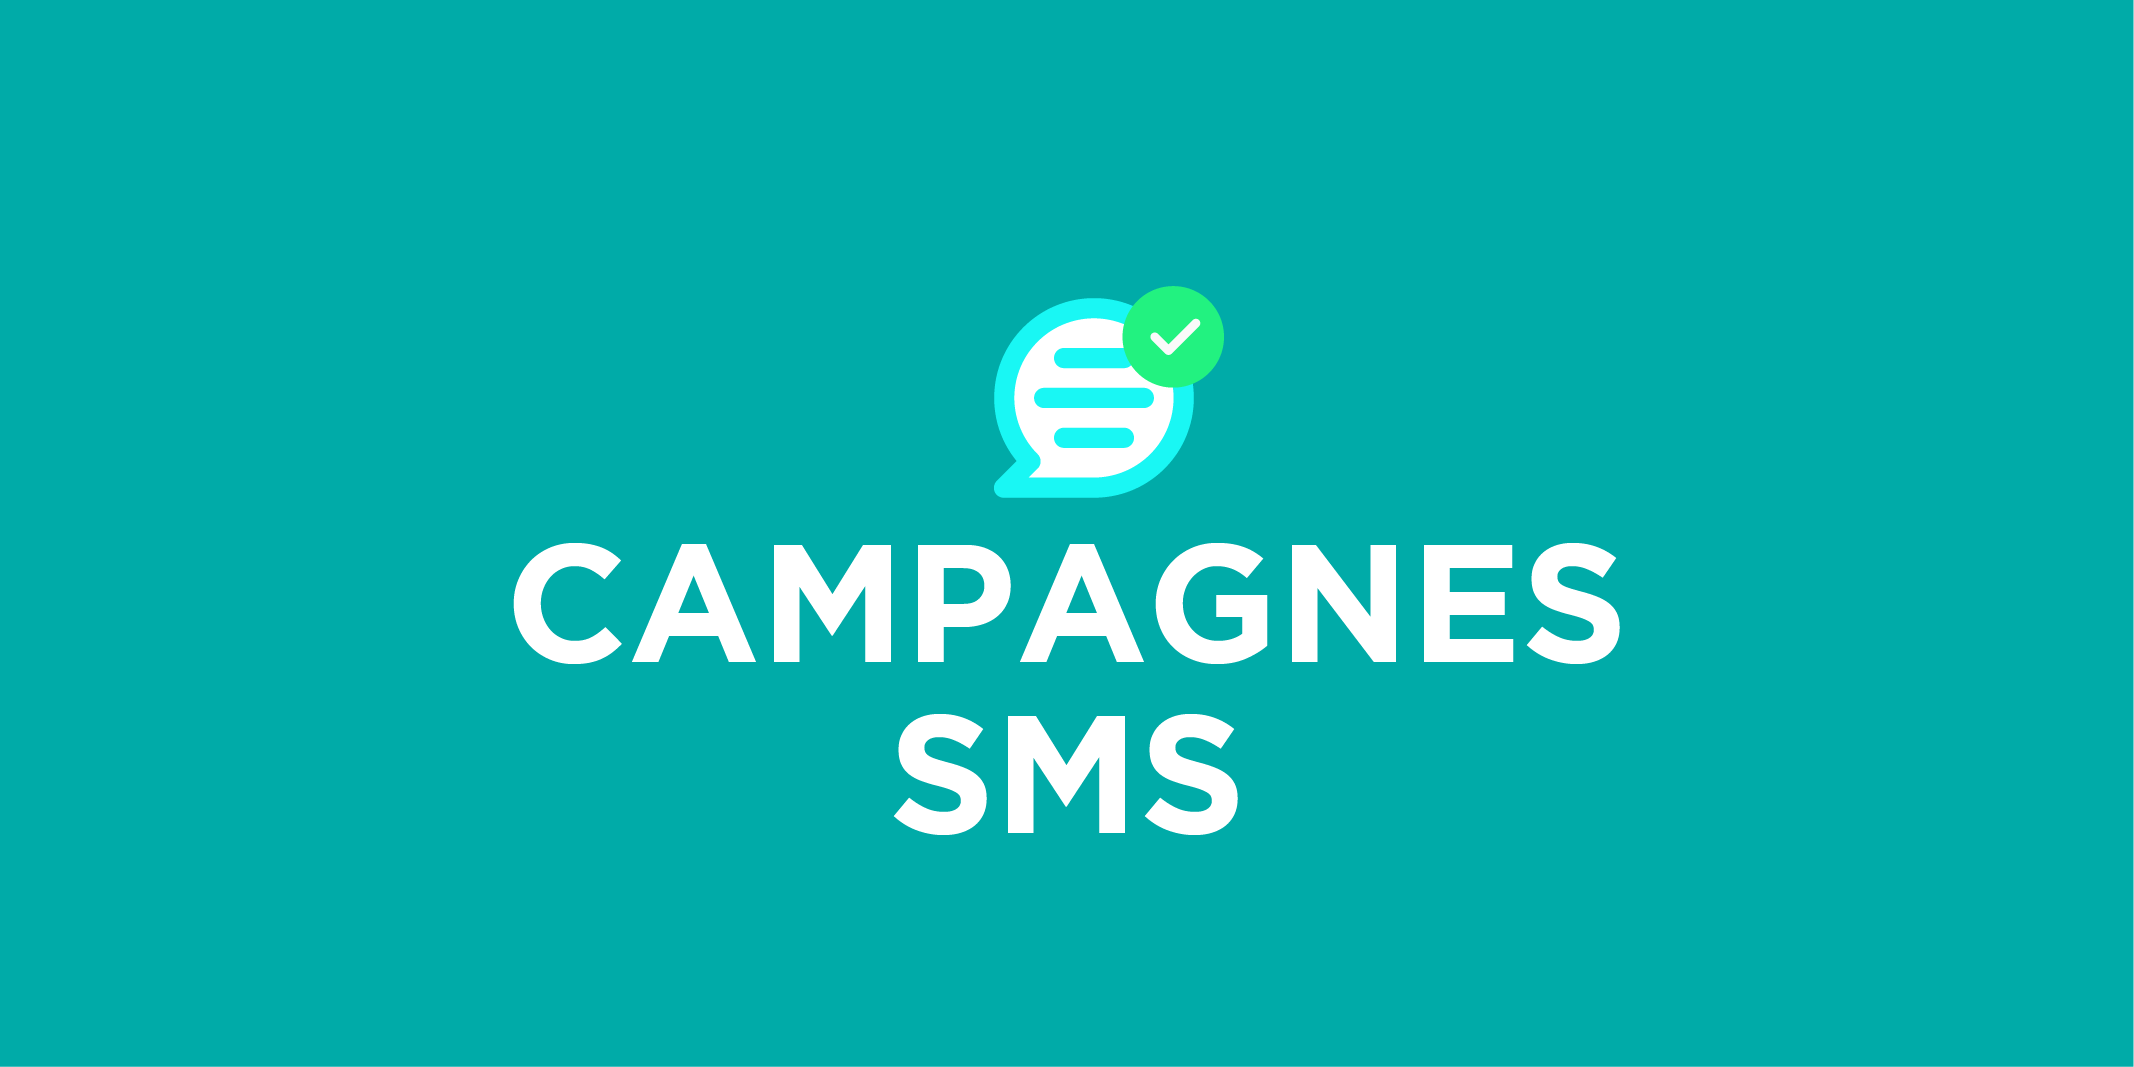 Comment réussir sa campagne SMS